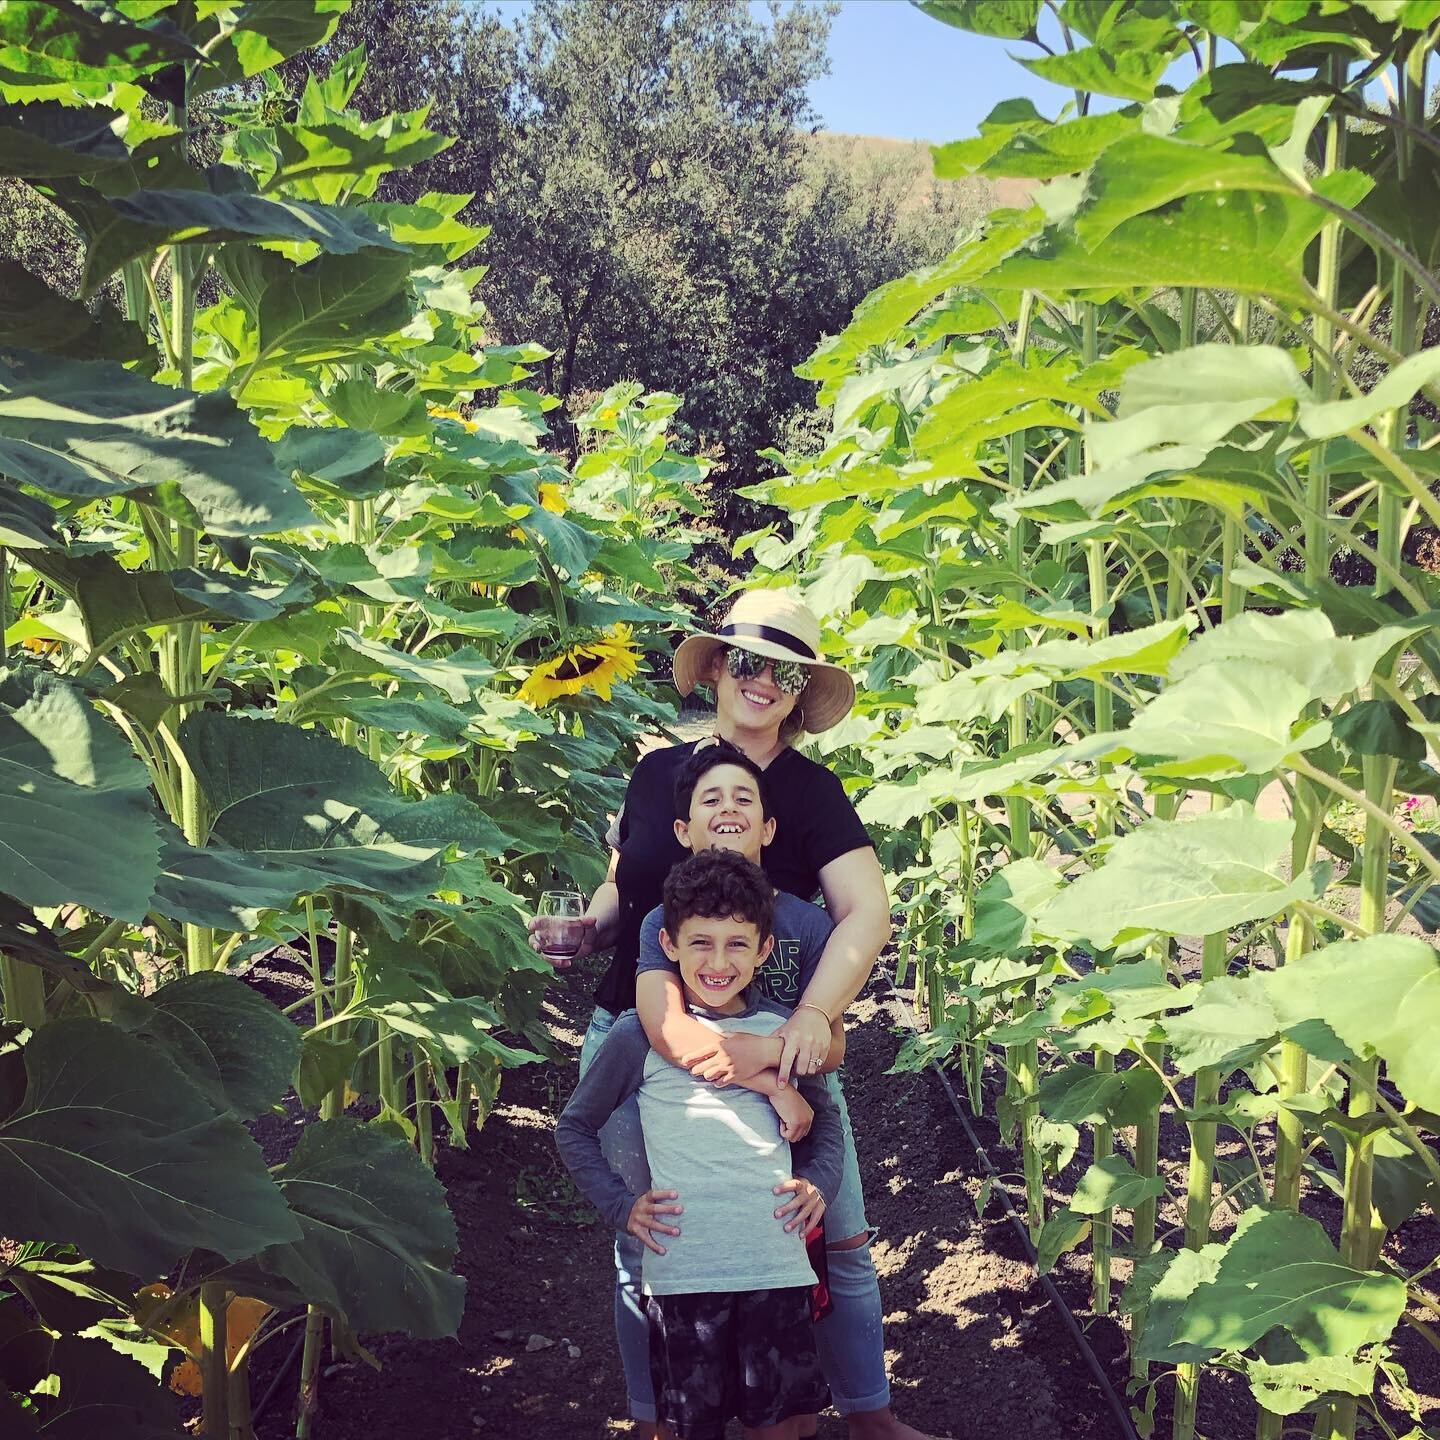 Wednesday&rsquo;s are for wine tasting, giant sunflowers and these boys!
🤍🌻🍷

#summer #californiaadventure #cambria #centralcalifornia